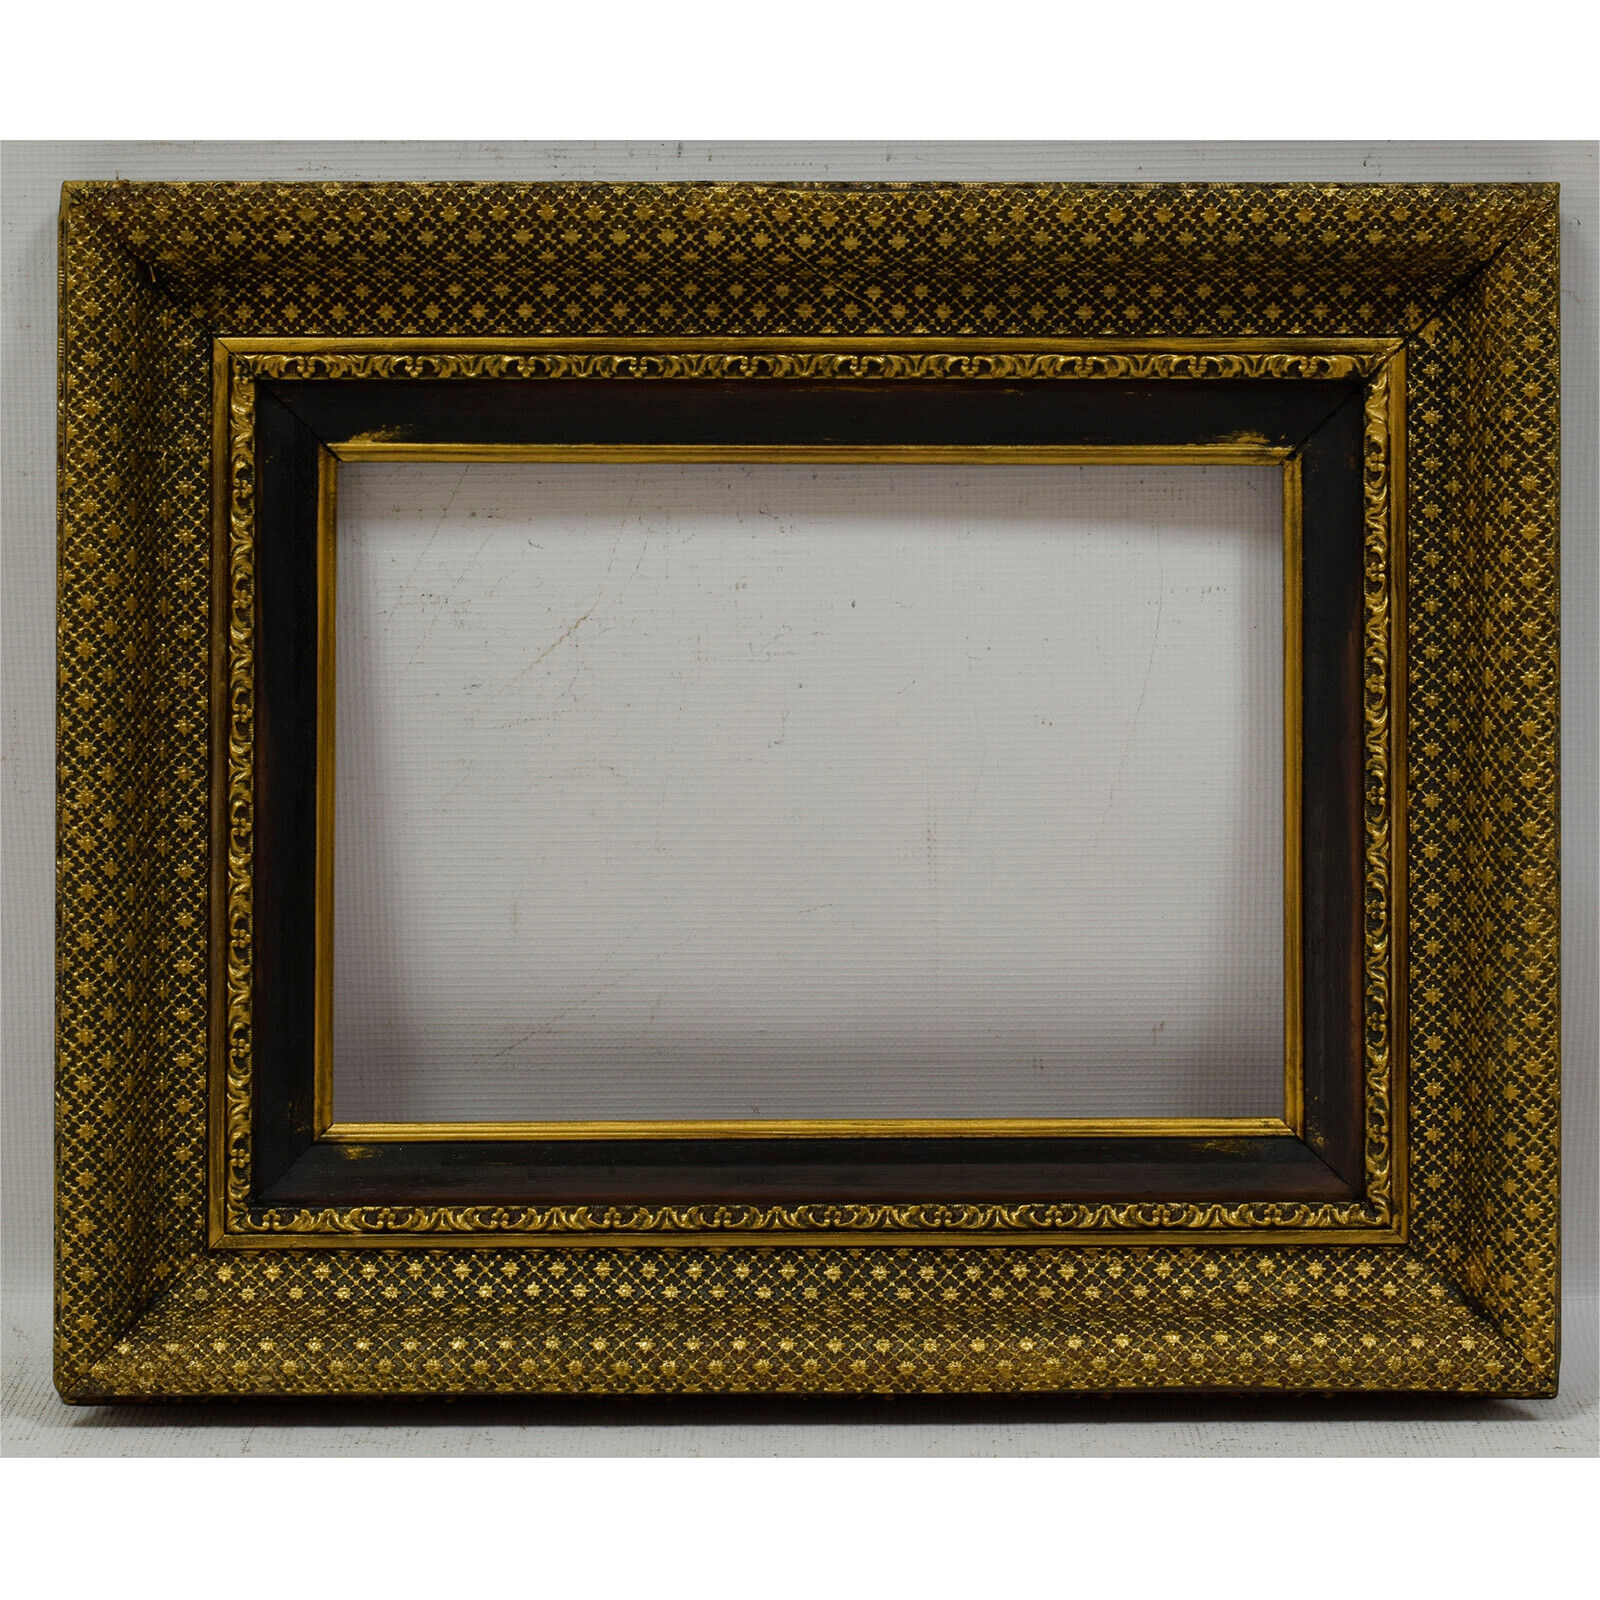 Old wooden frame decorative Internal: 13.9x9.8 in